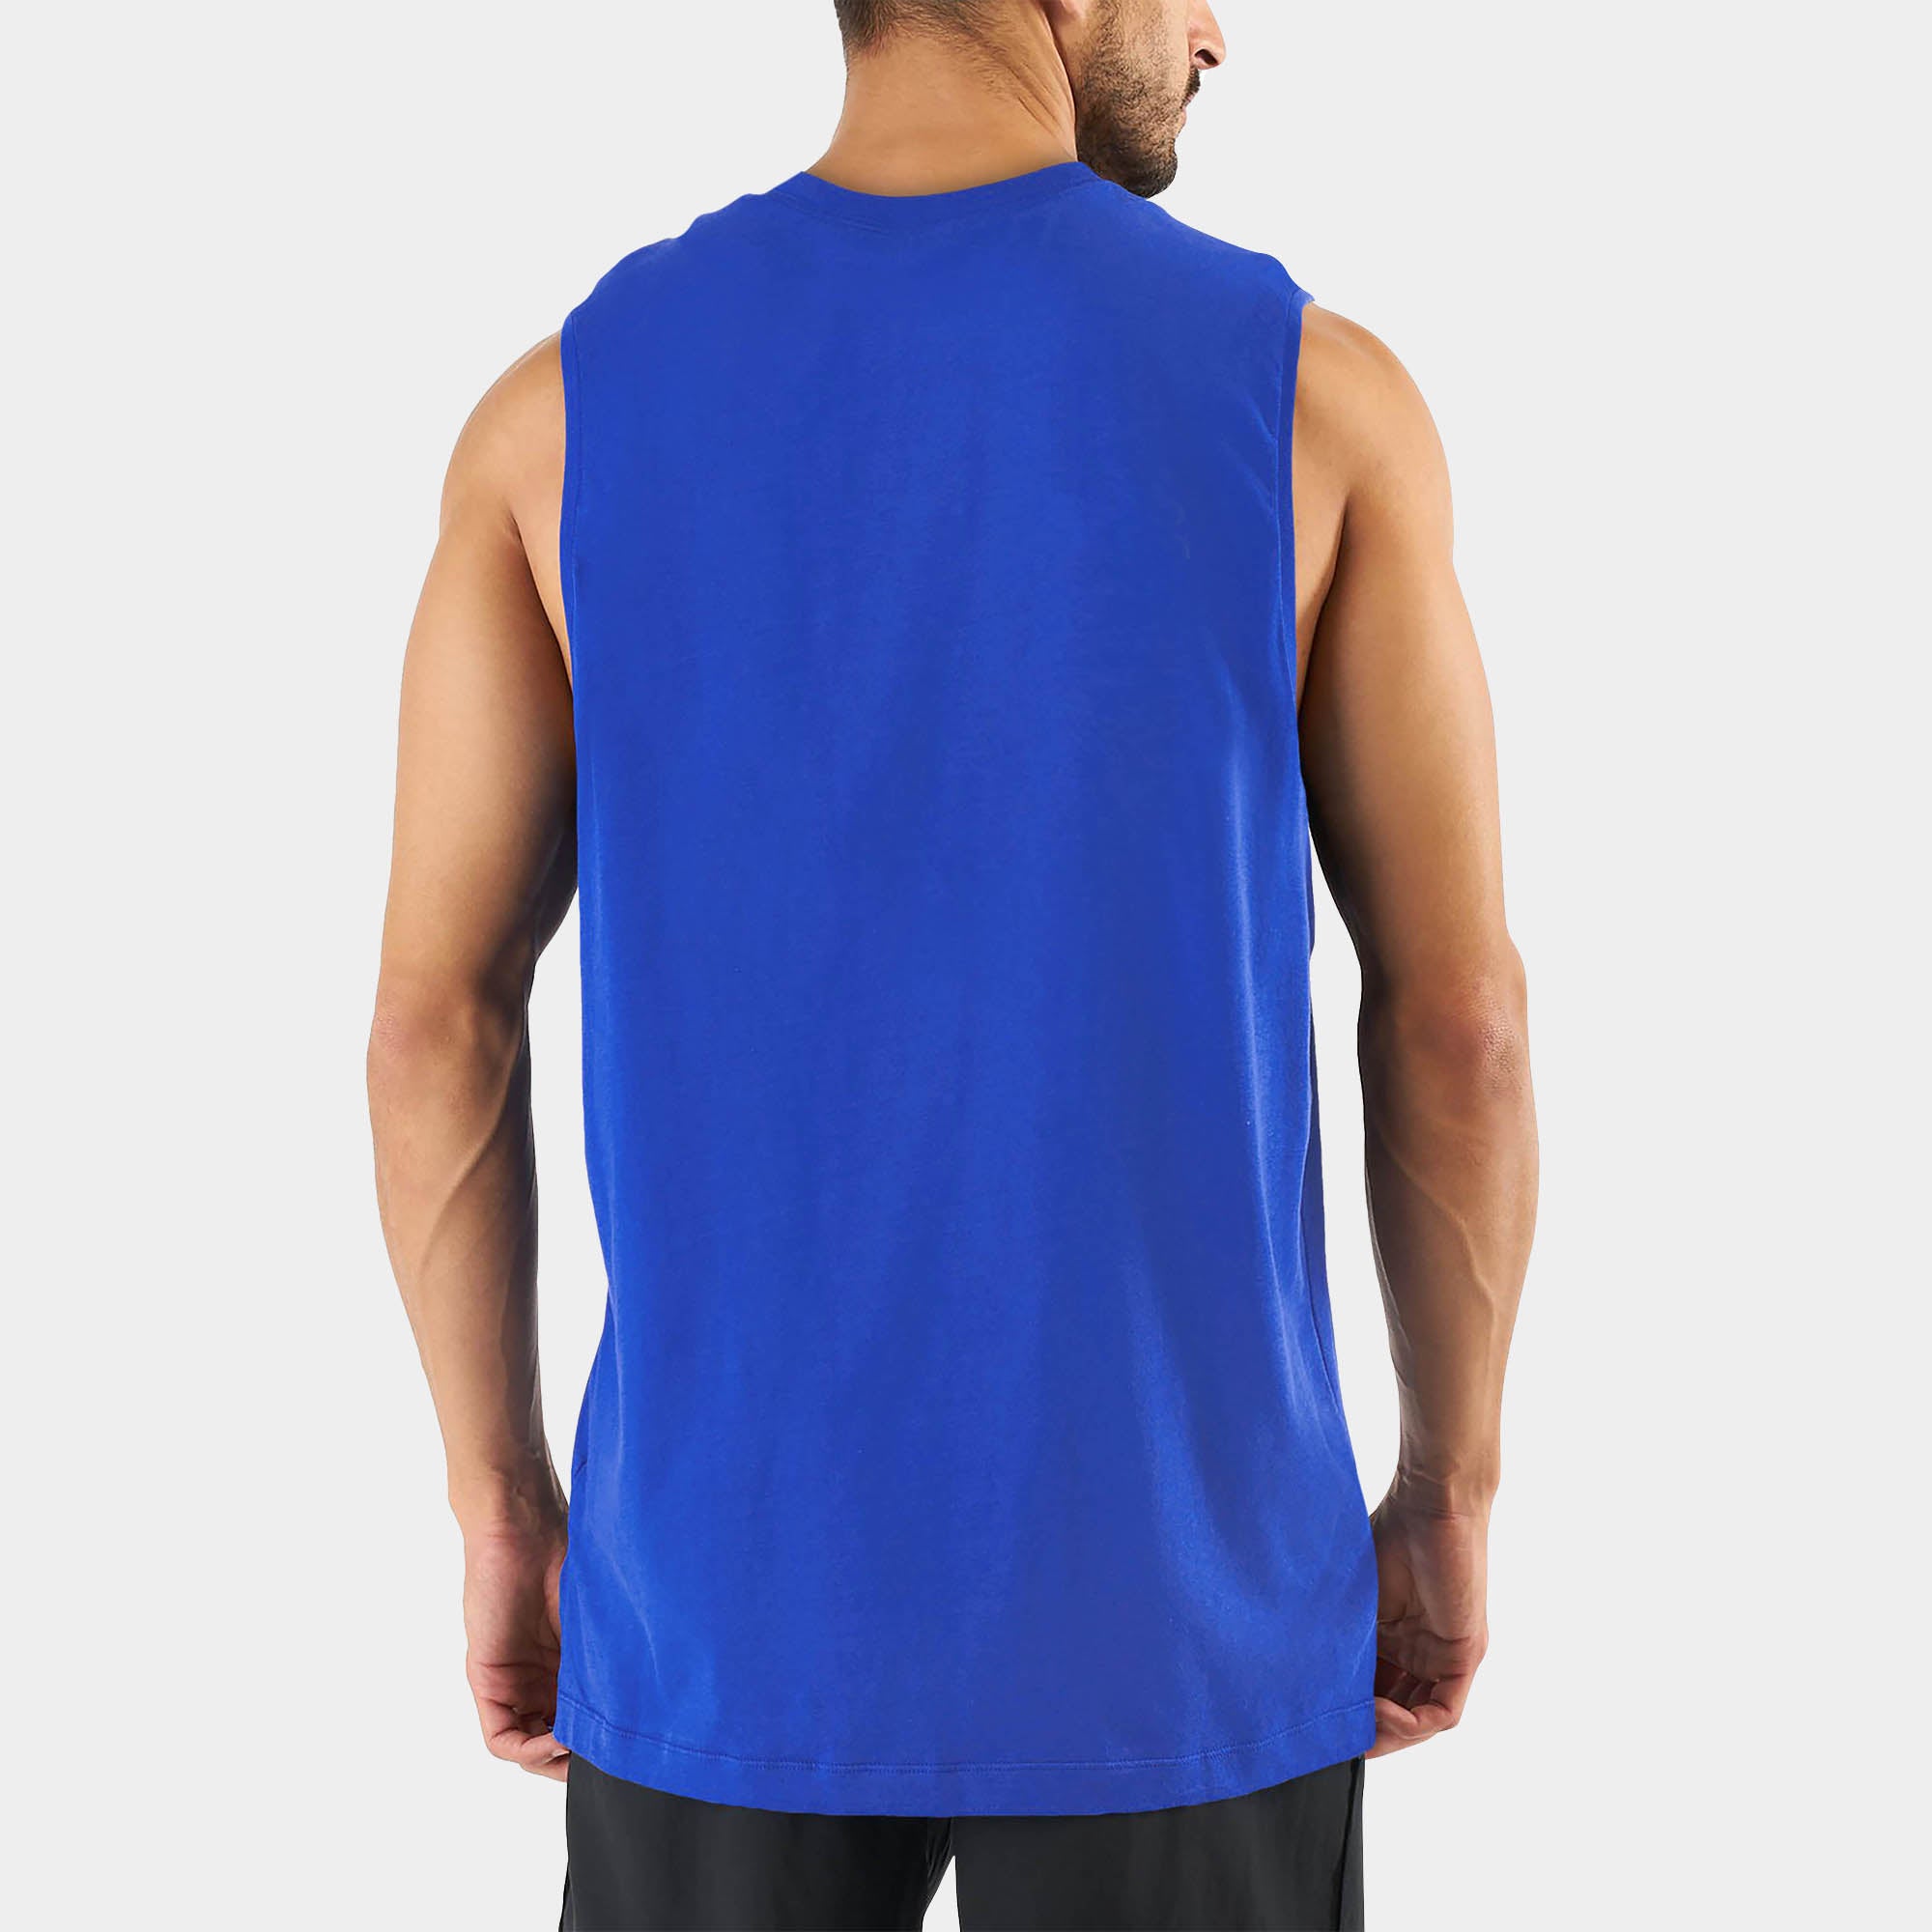 muscle tank_muscle tee_muscle tank tops_cropped muscle tank_under armour muscle shirt_insta slim tank_men muscle shirt_tank top_Royal Blue